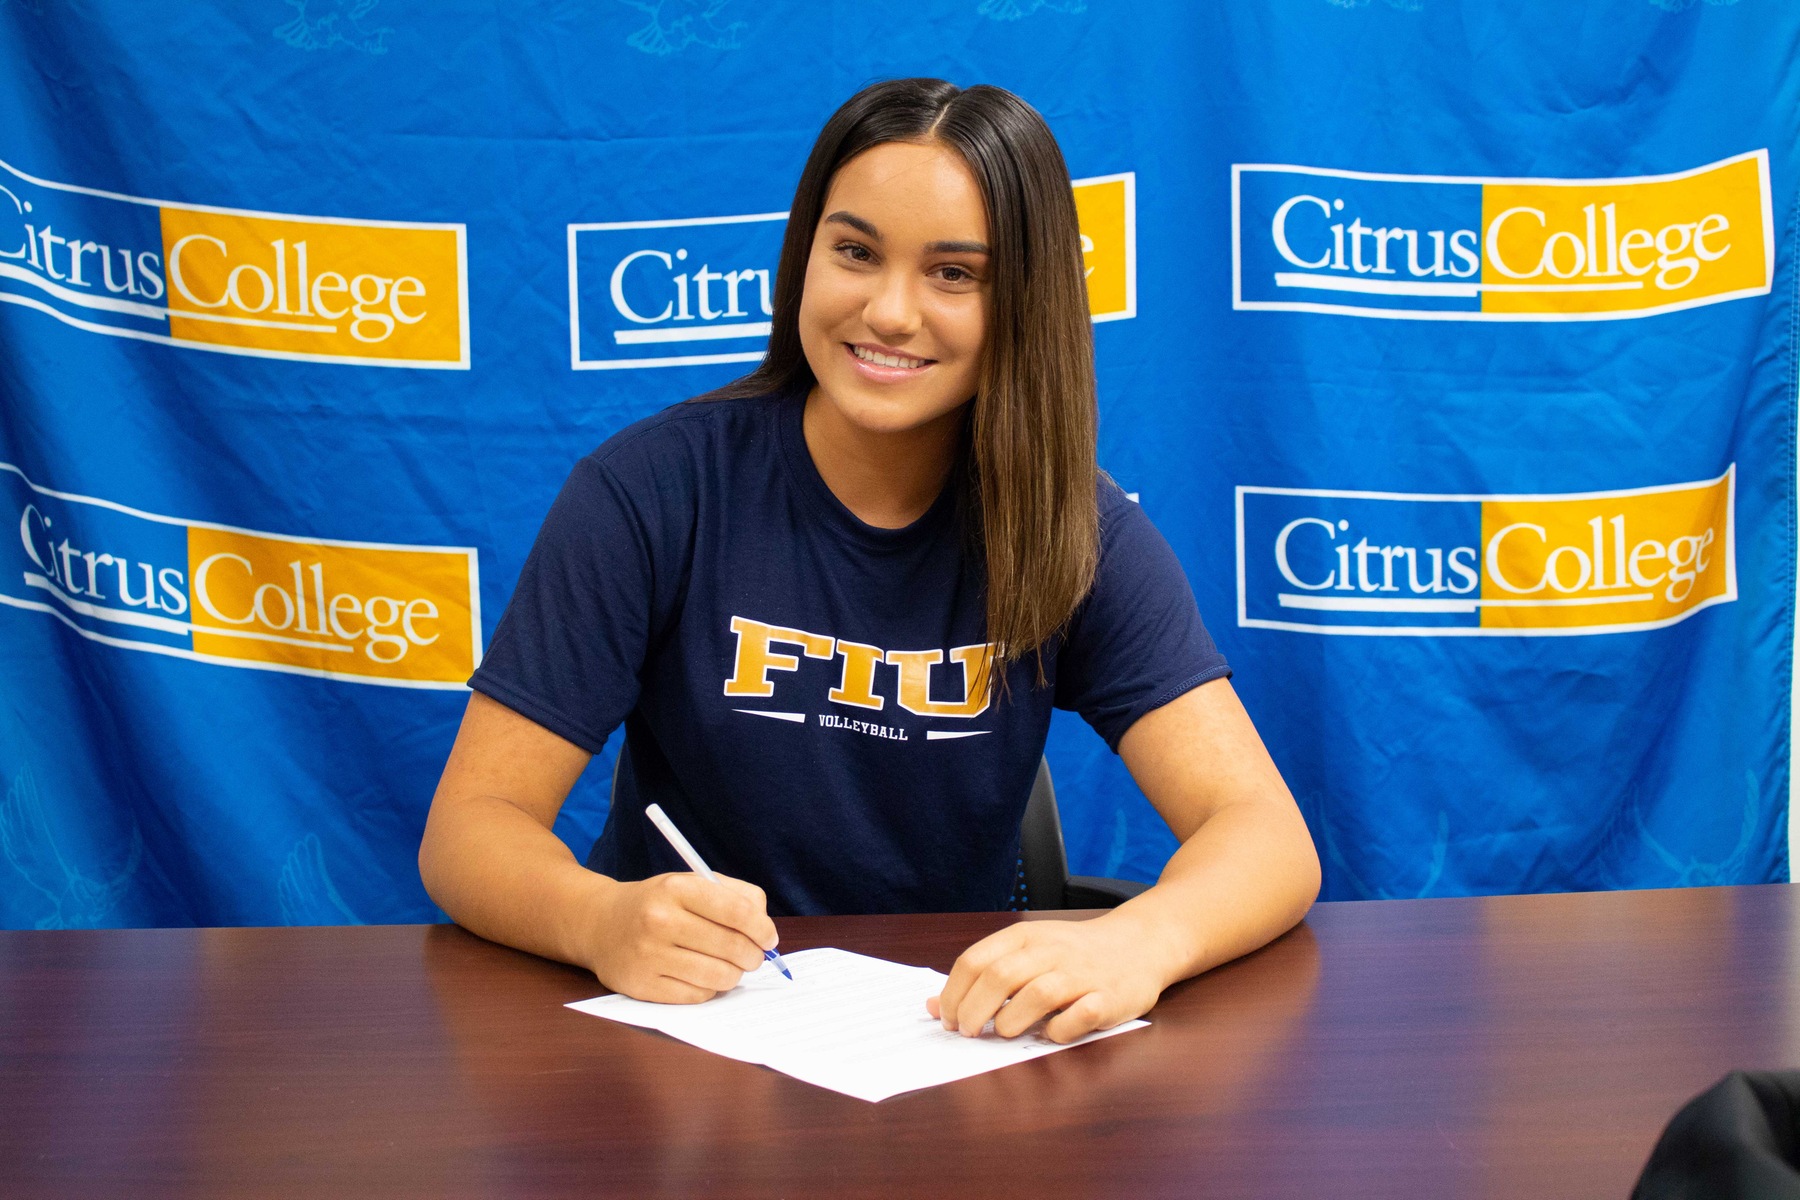 WSC East Player of the Year Lipscomb Signs With FIU